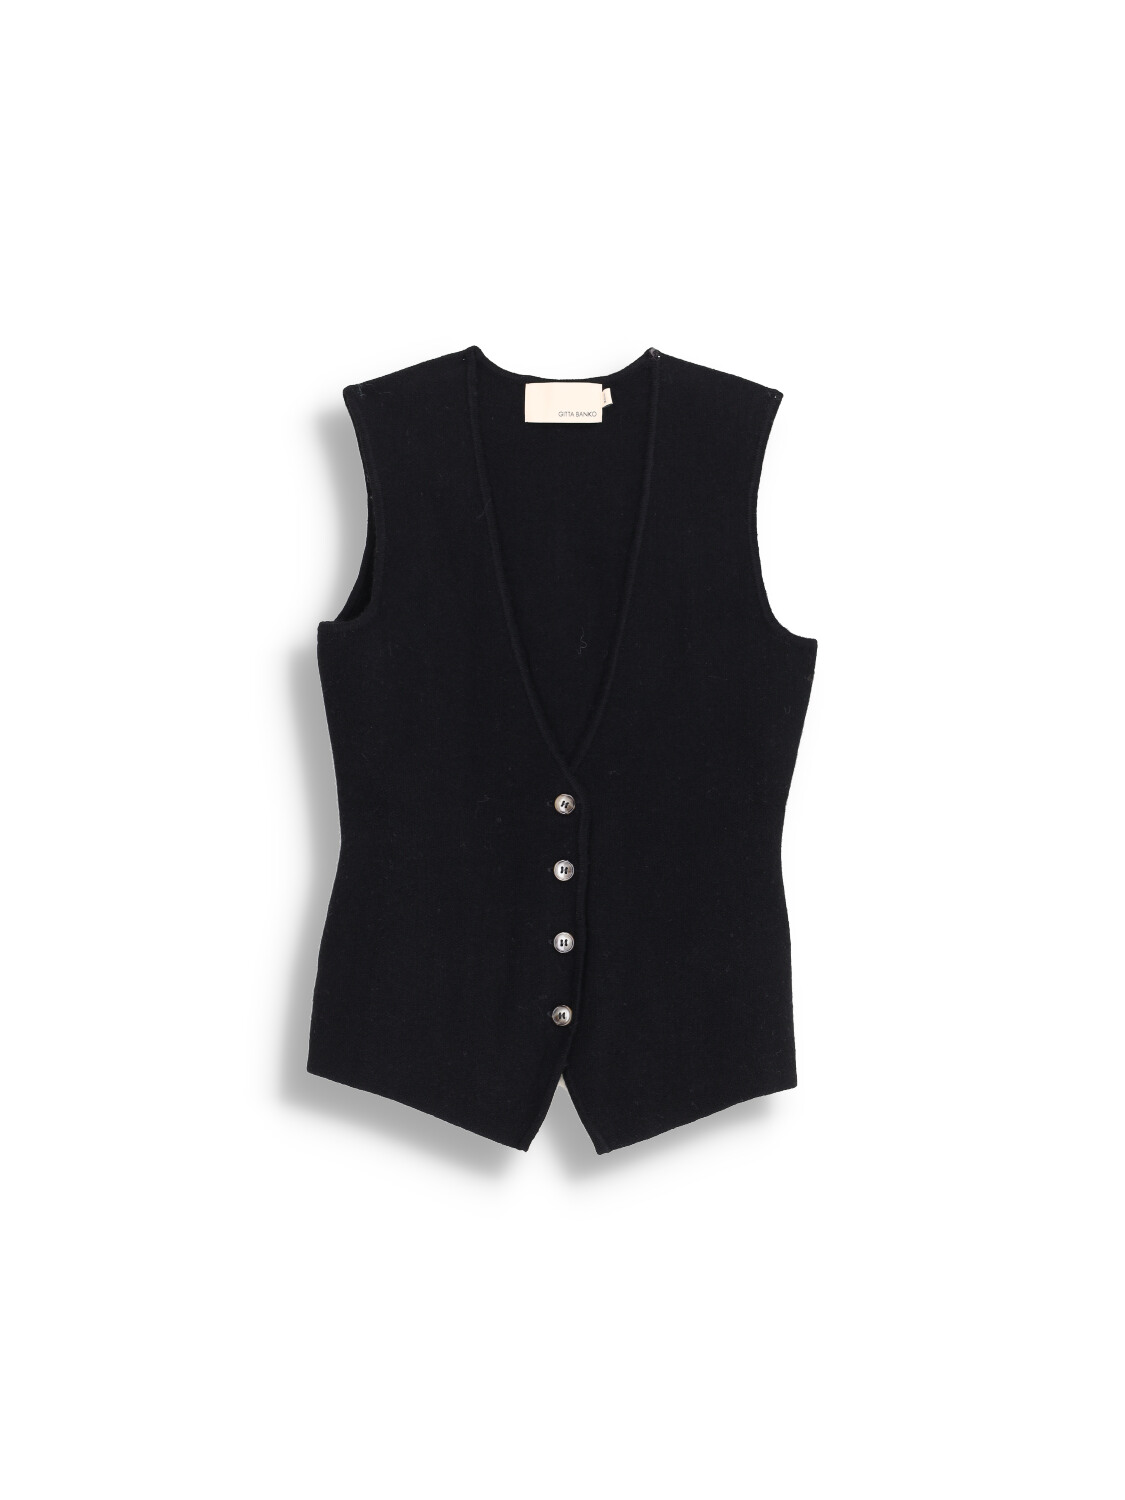 Mia - knitted vest with V-neck and made of wool